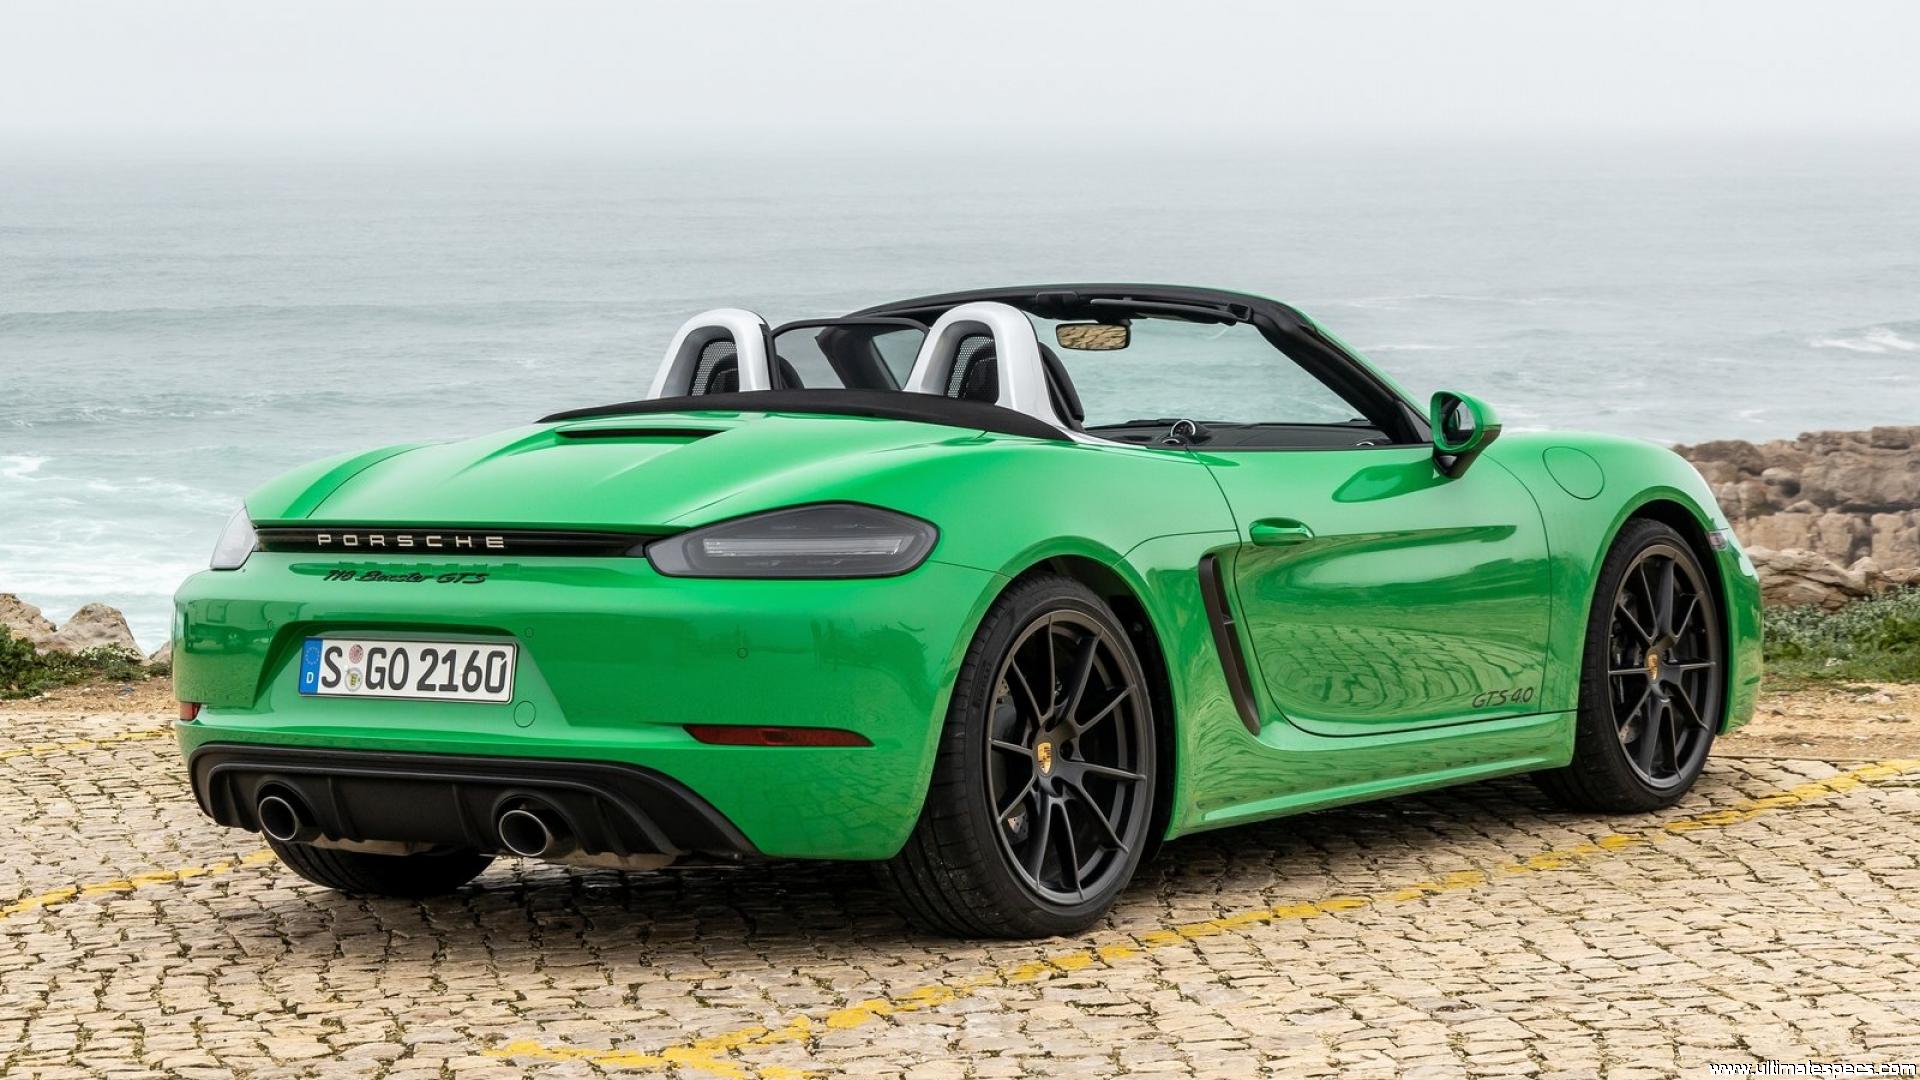 Porsche 718 Boxster Gts 4 0 Pdk Images Pictures Gallery